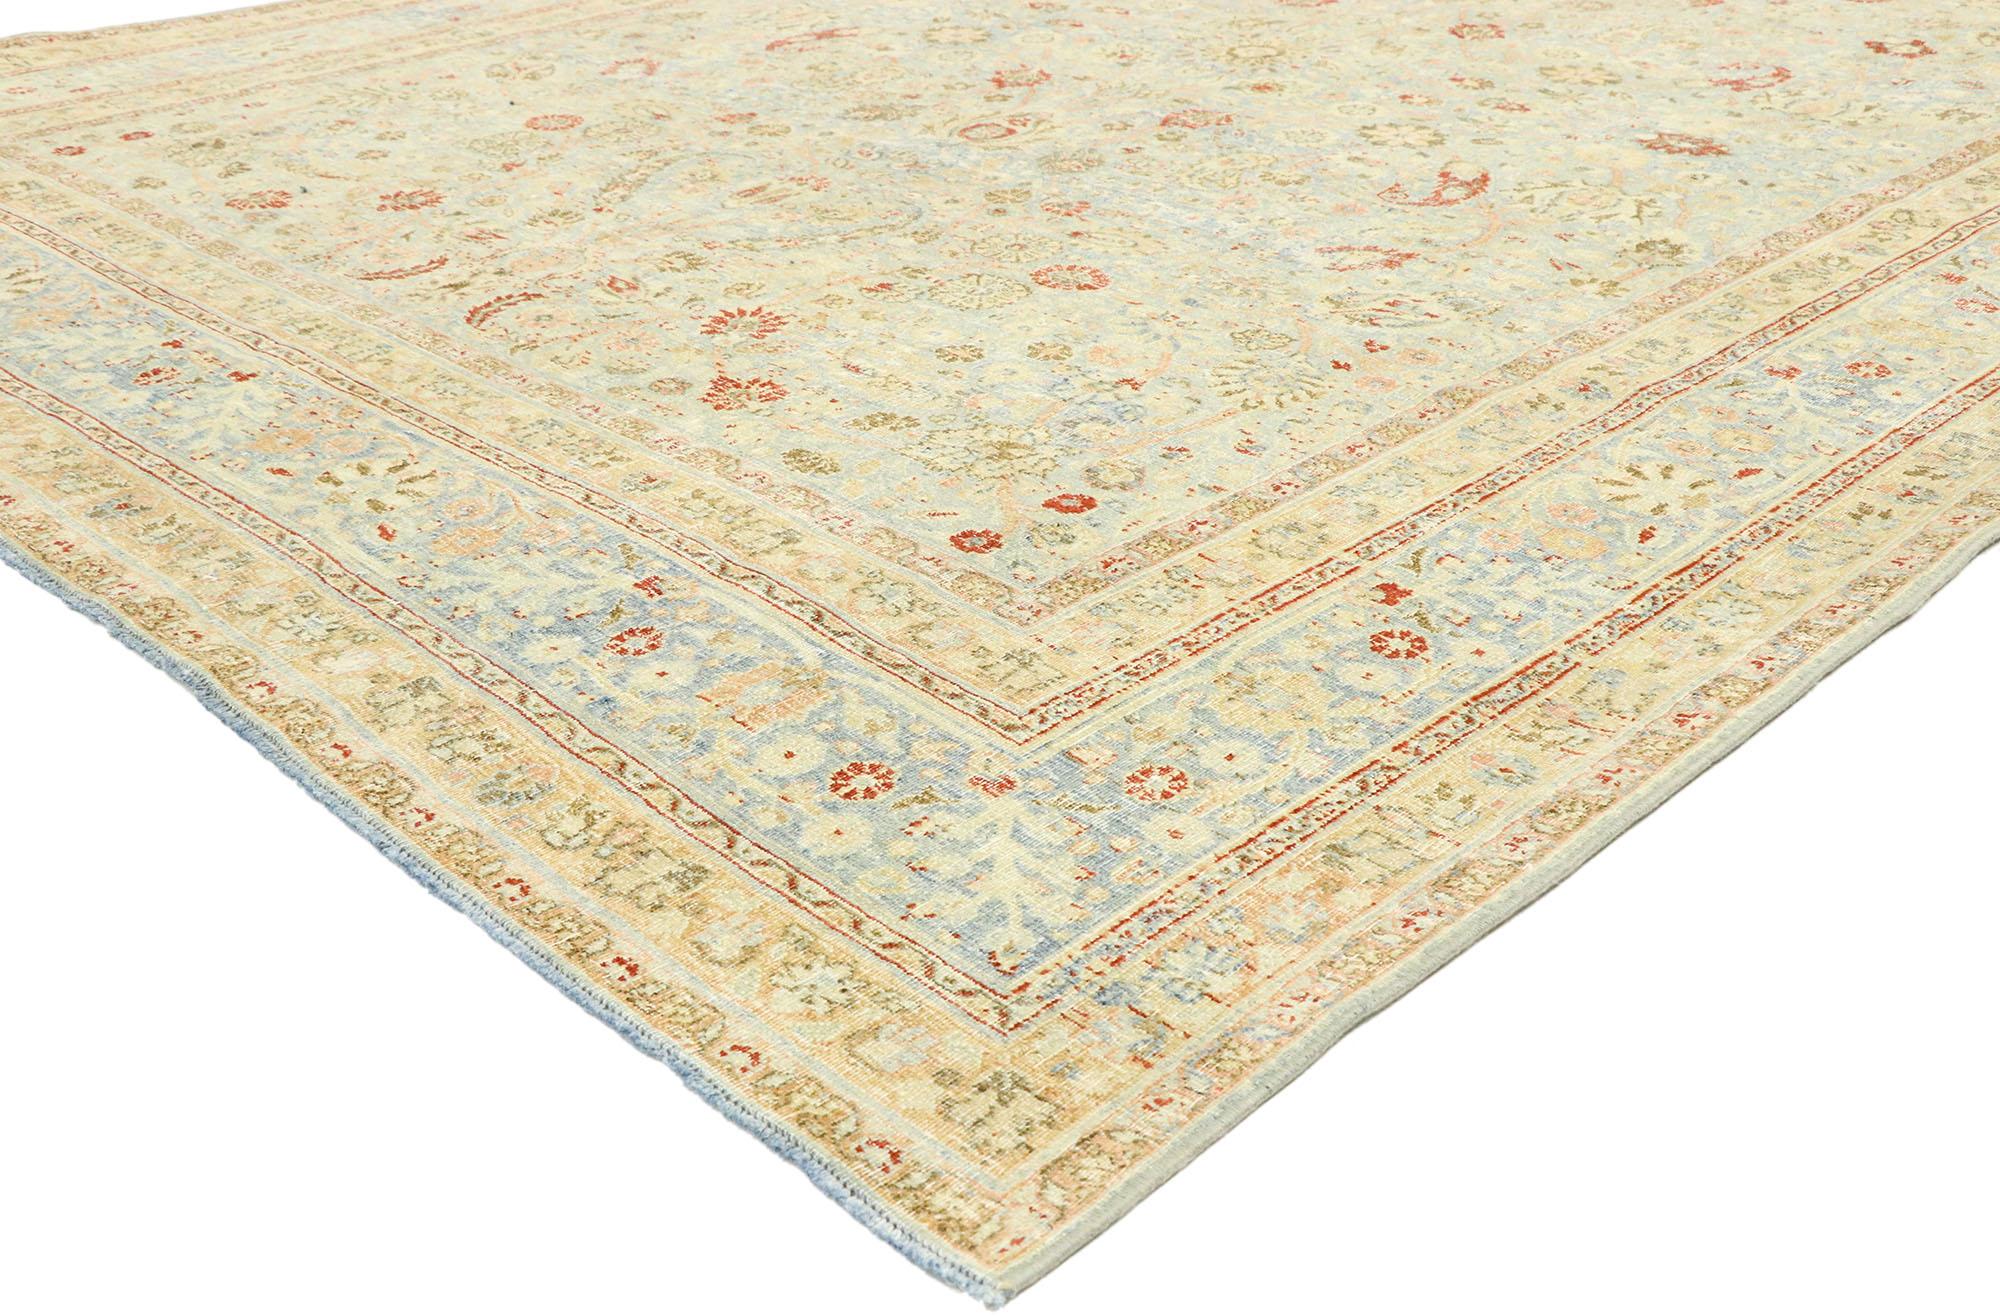 53036, distressed antique Persian Khorassan rug with Rustic English Manor style. With a timeless floral pattern and lovingly timeworn appearance, this hand knotted wool distressed antique Persian Khorassan rug beautifully embodies rustic English